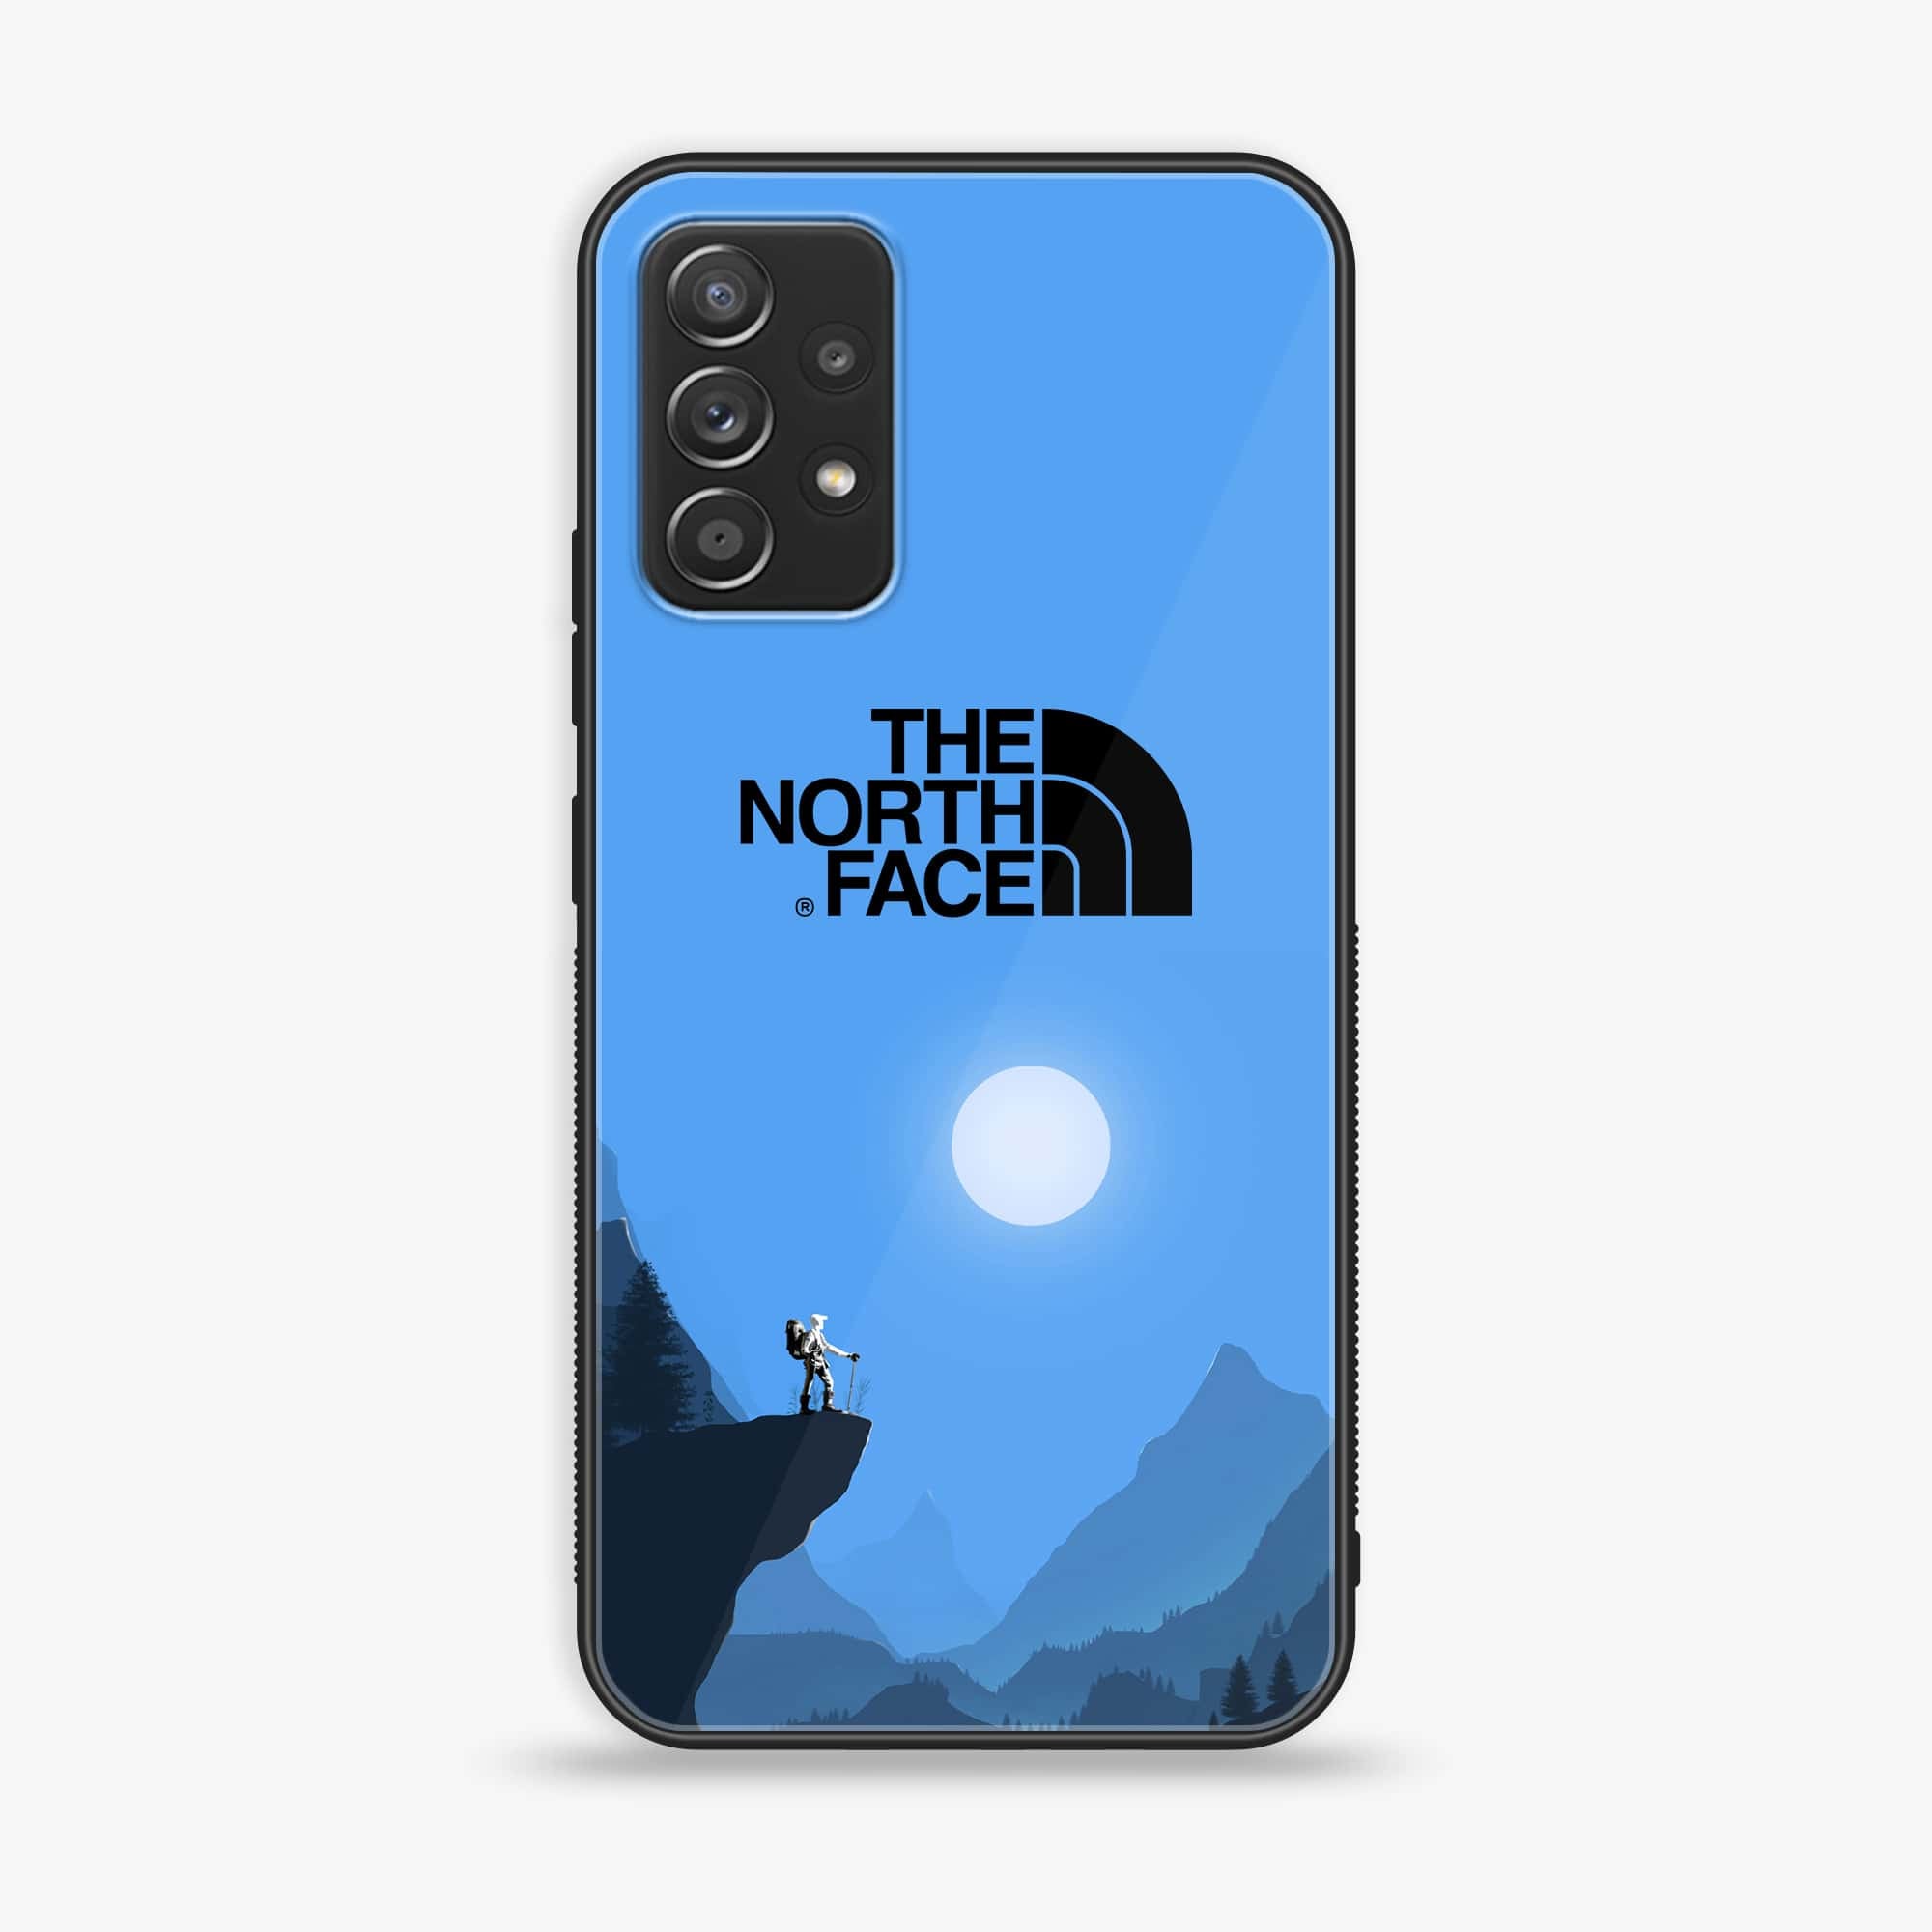 Samsung Galaxy A52 - The North Face Series - Premium Printed Glass soft Bumper shock Proof Case